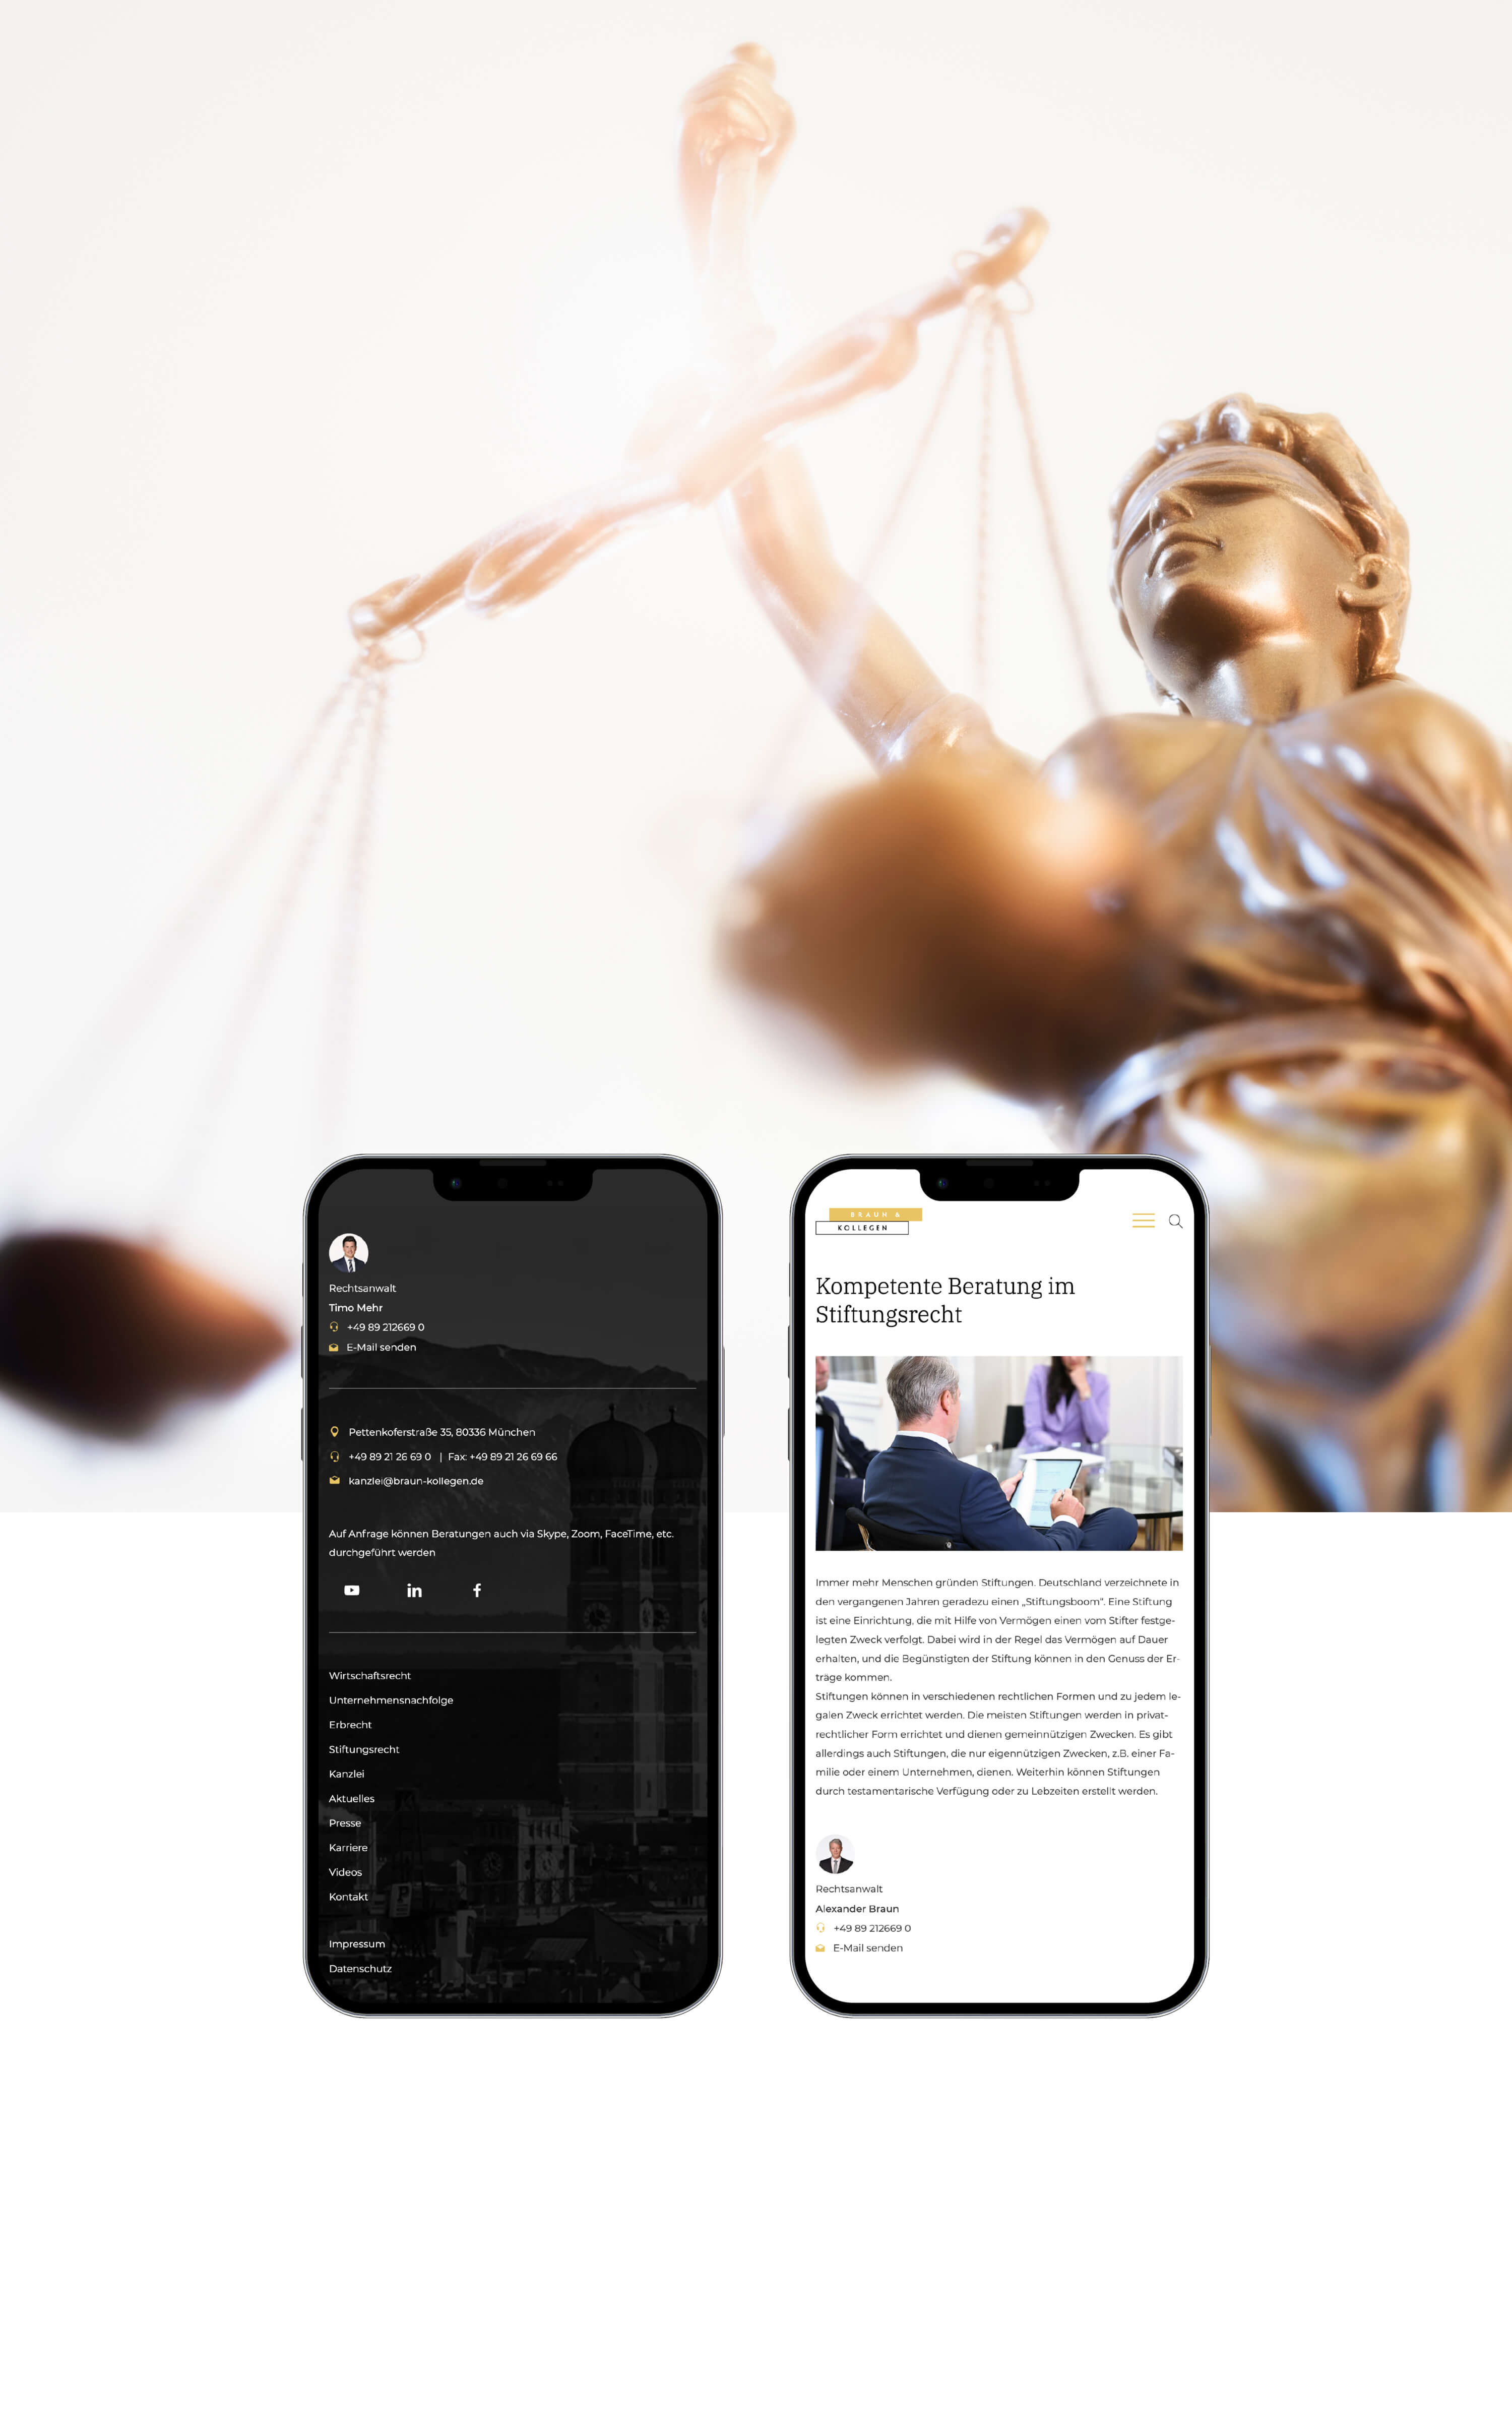 Law firm Braun & Colleagues // close2 new media GmbH